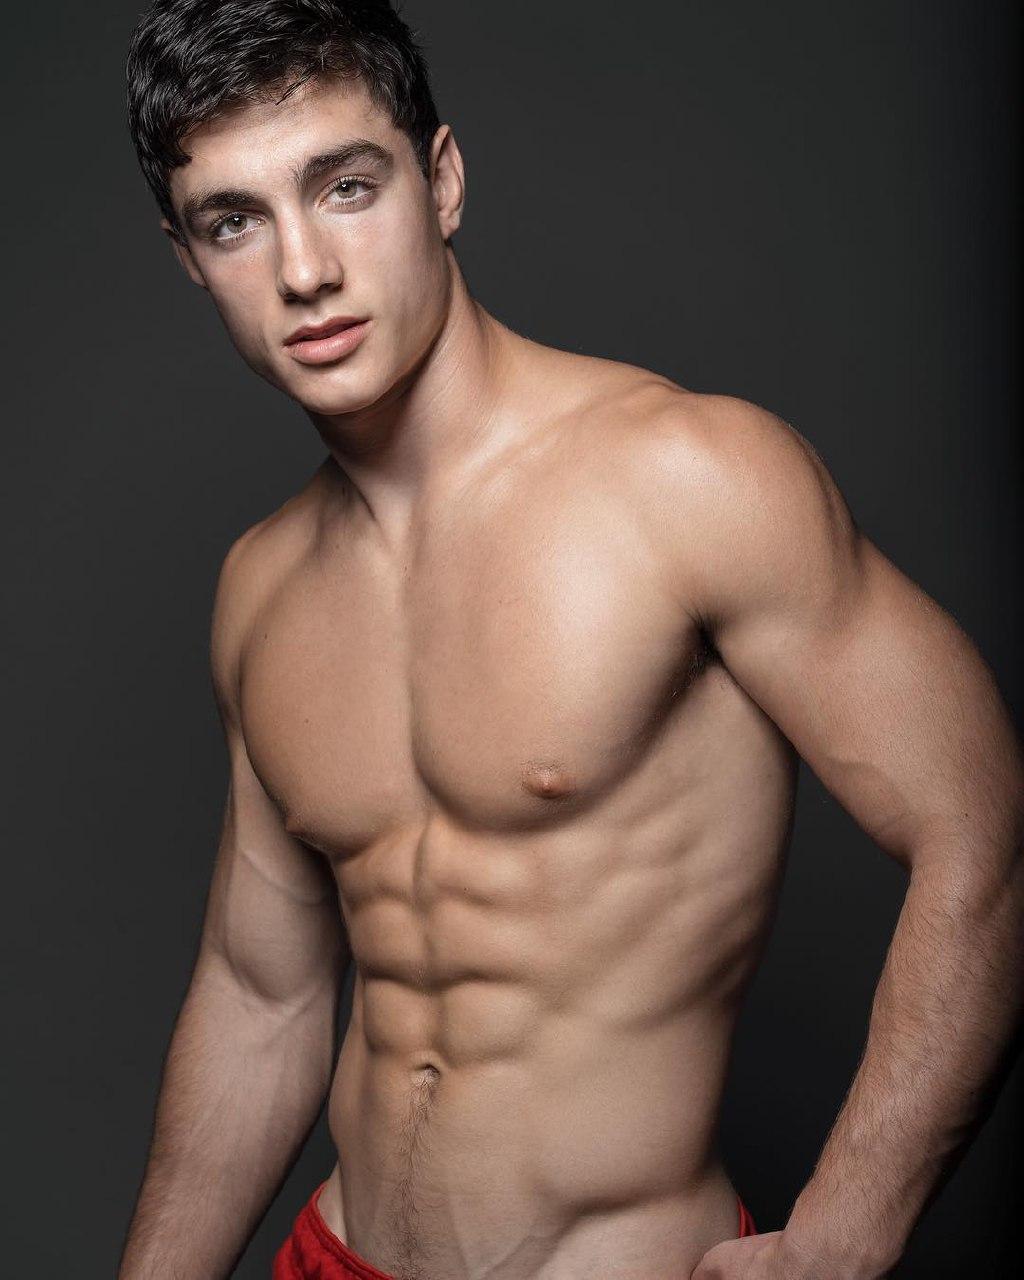 The Hottest Male Models: KEITH LAUE